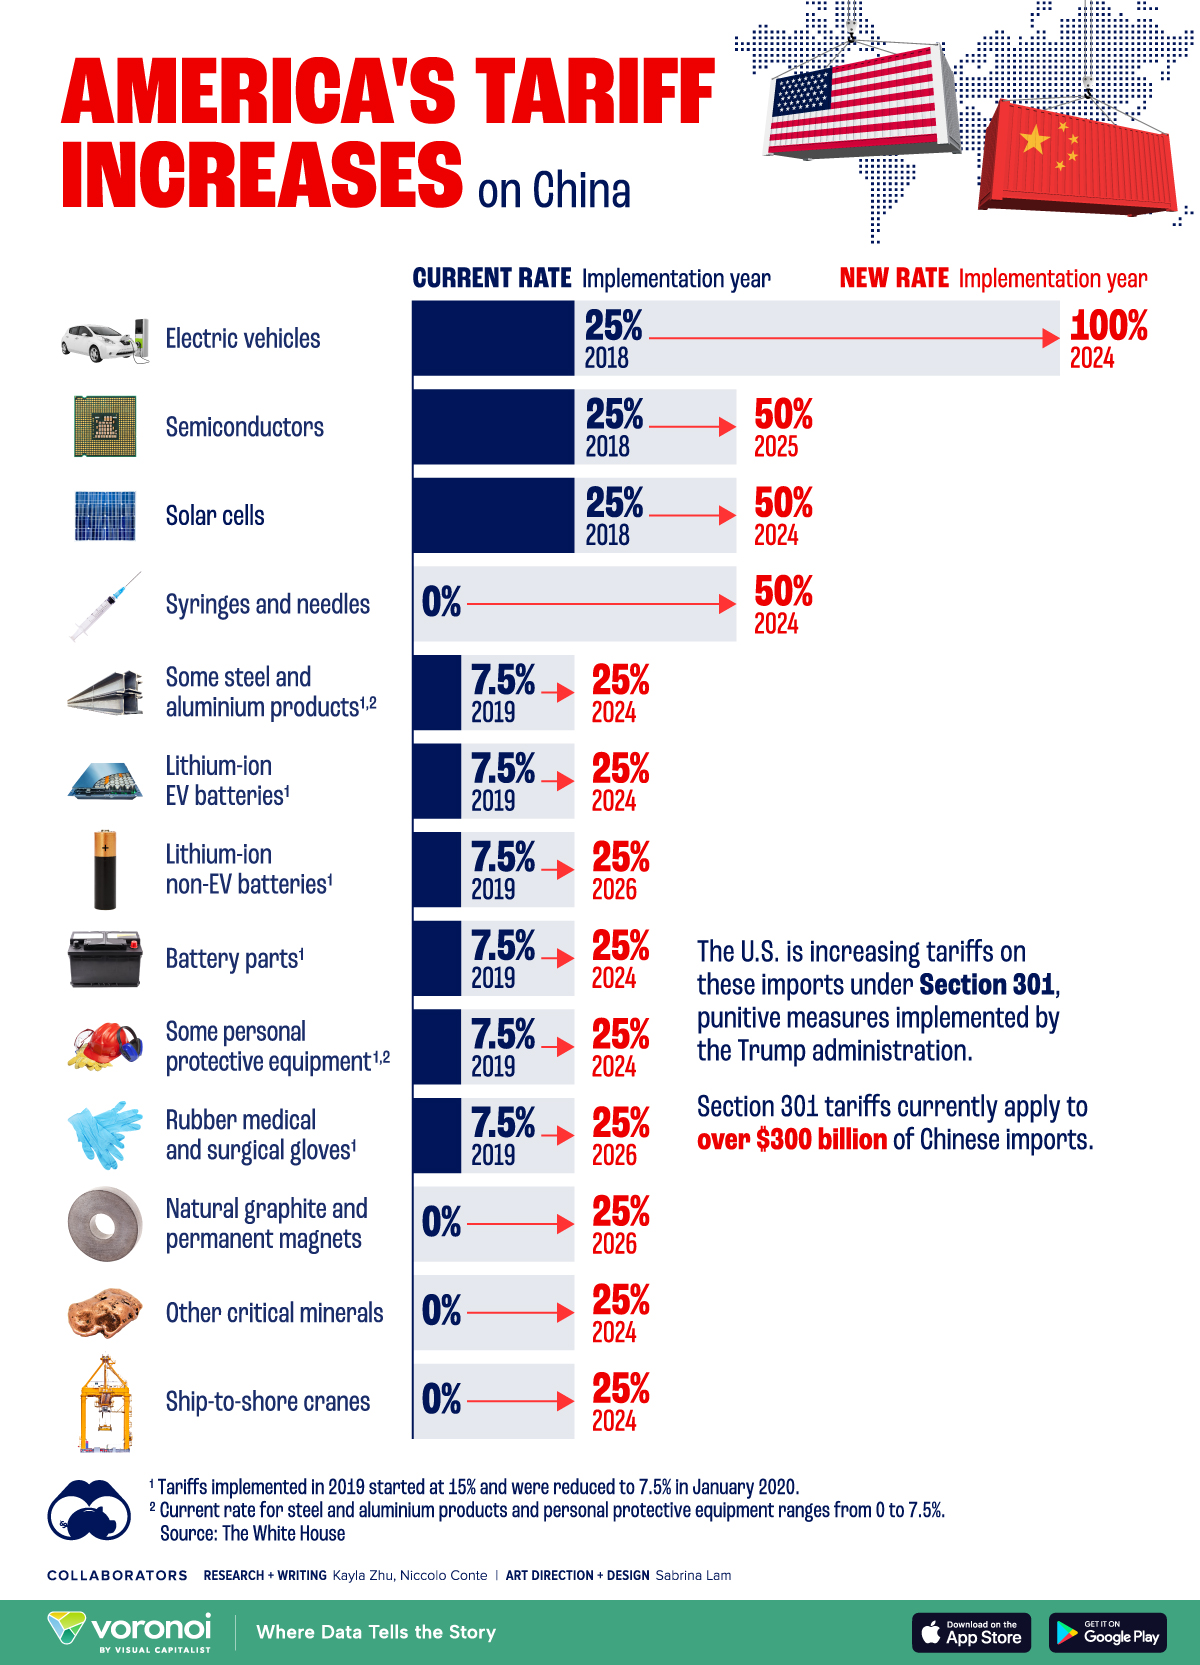 An infographic showing the current and new tariff rates the U.S. has imposed on various Chinese goods.